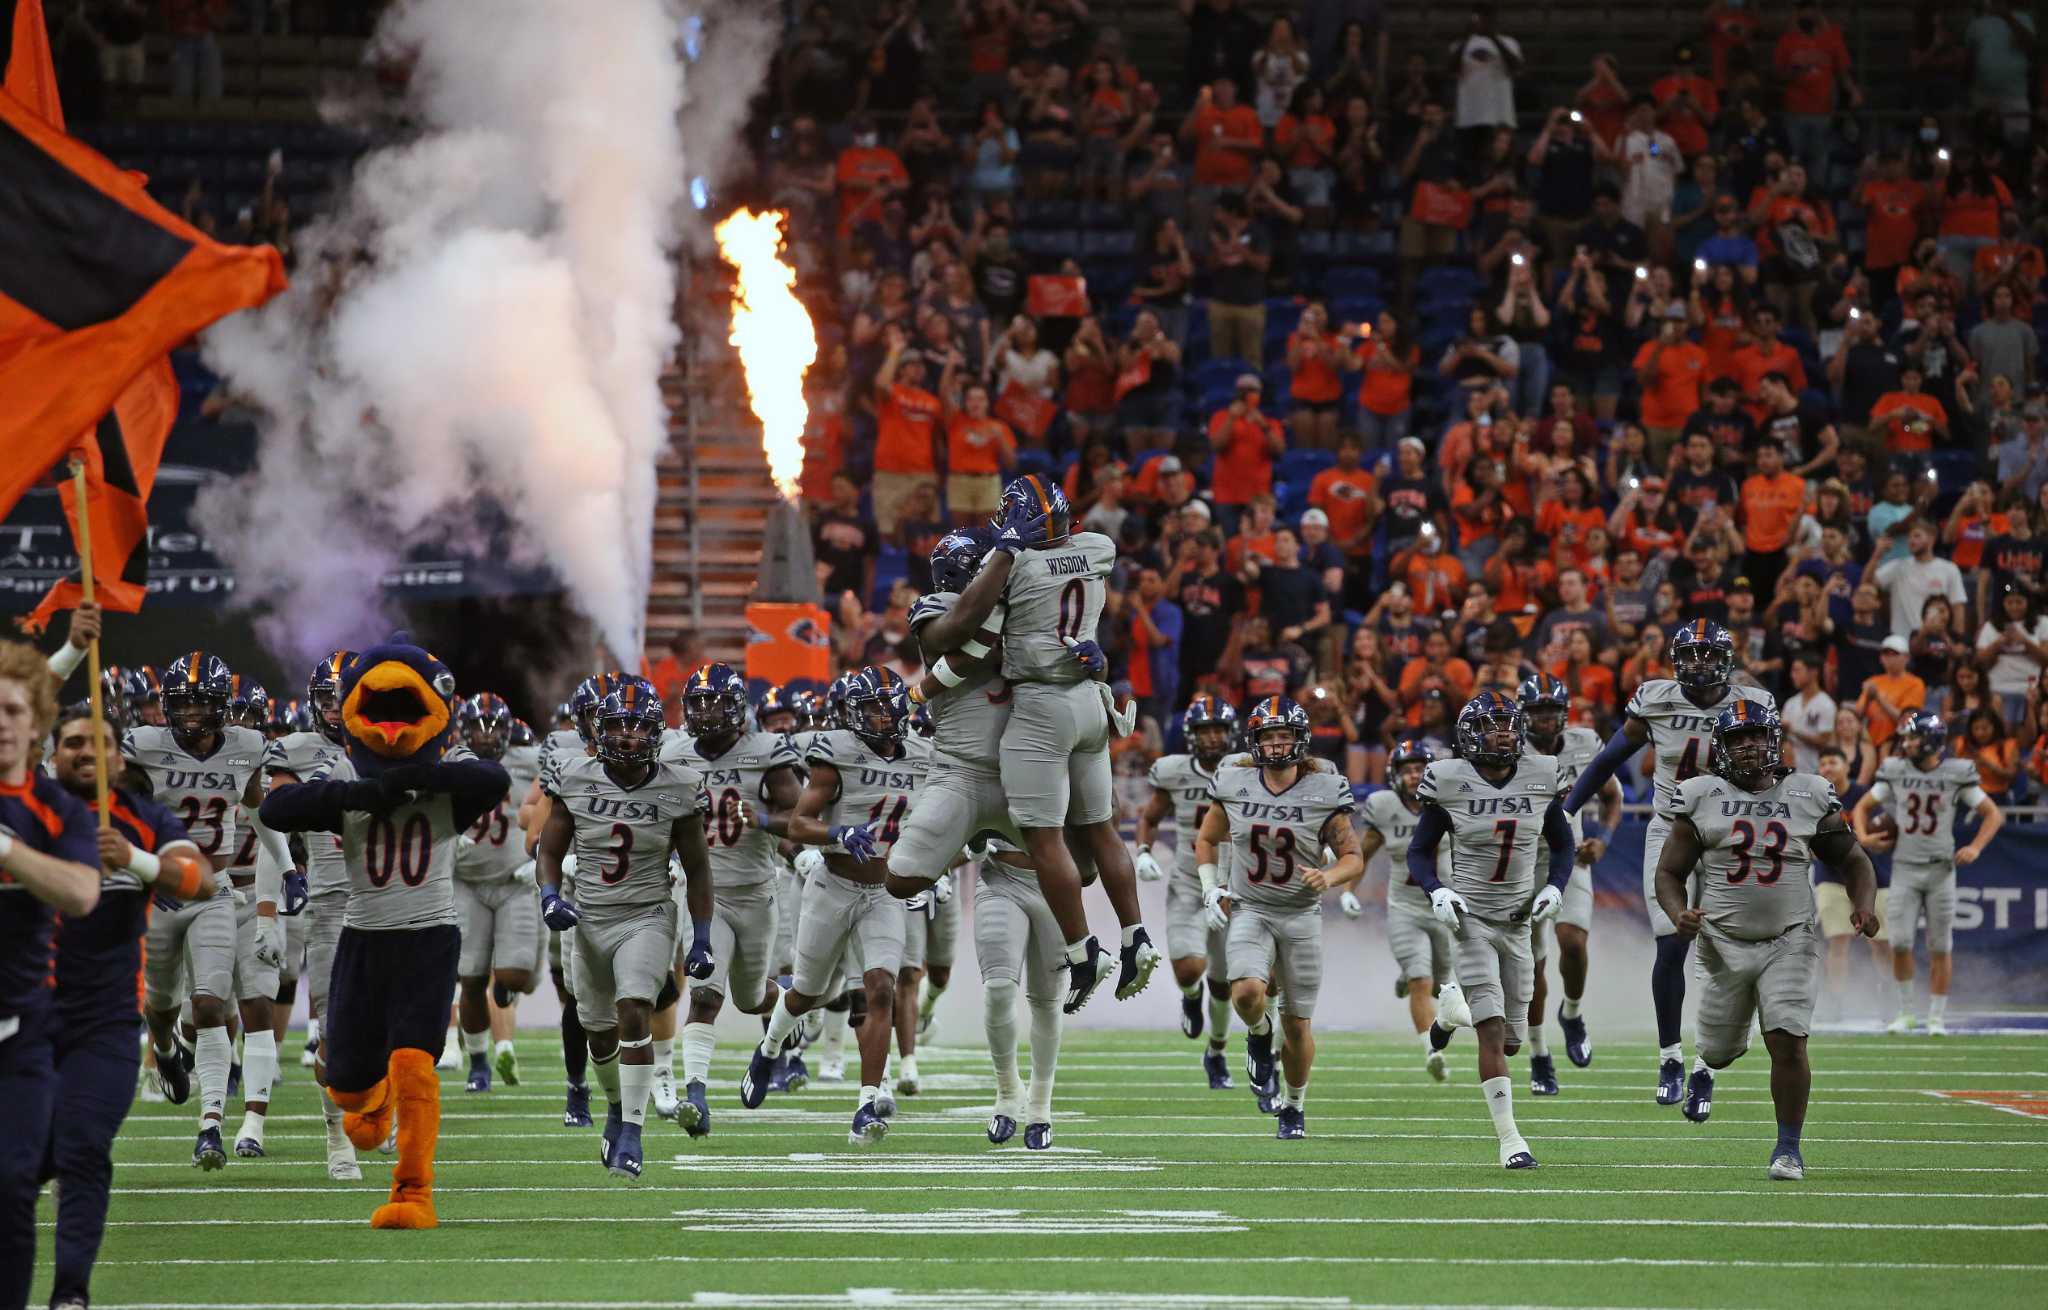 How to get 10 UTSA football tickets at the Alamodome